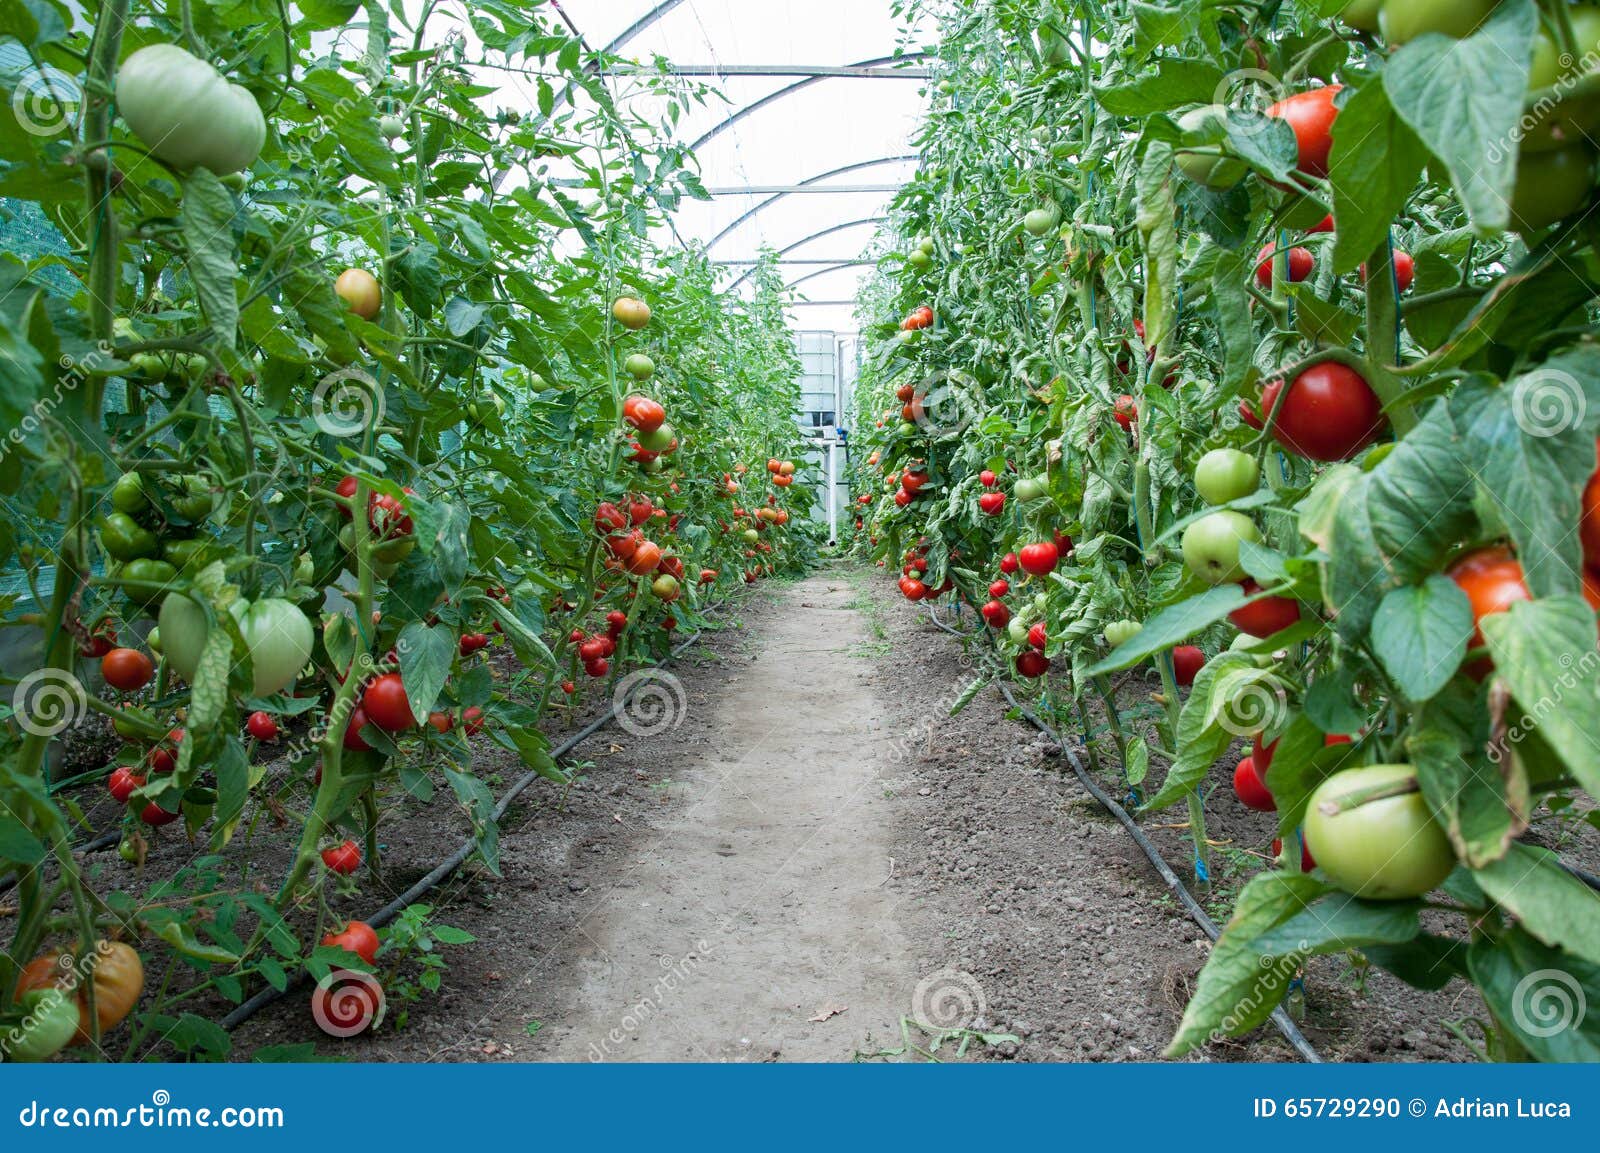 field of tomatoes